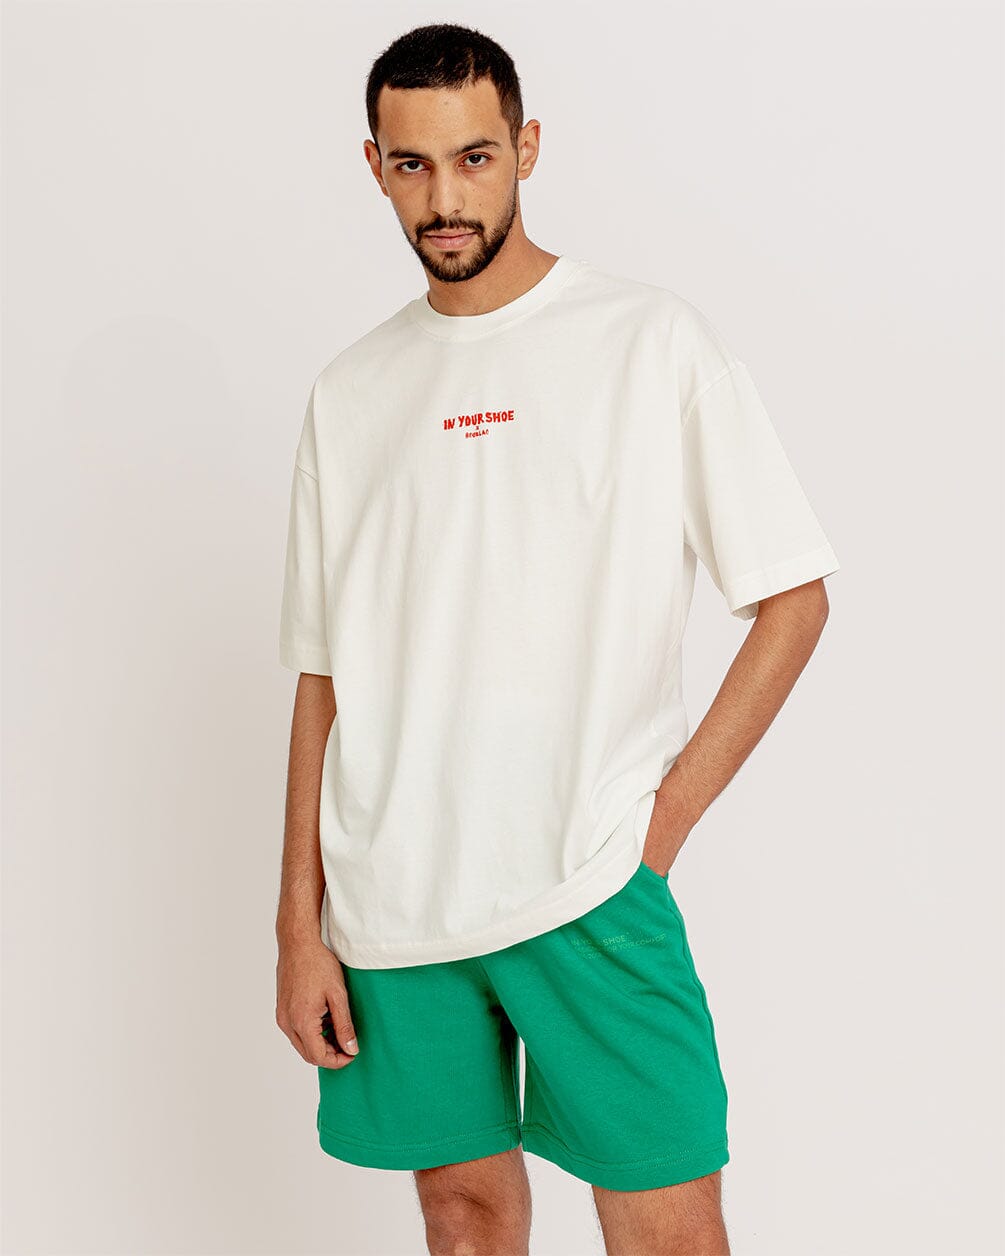 Hiding The Body Printed Oversized Tee Printed Oversized Tees IN YOUR SHOE 